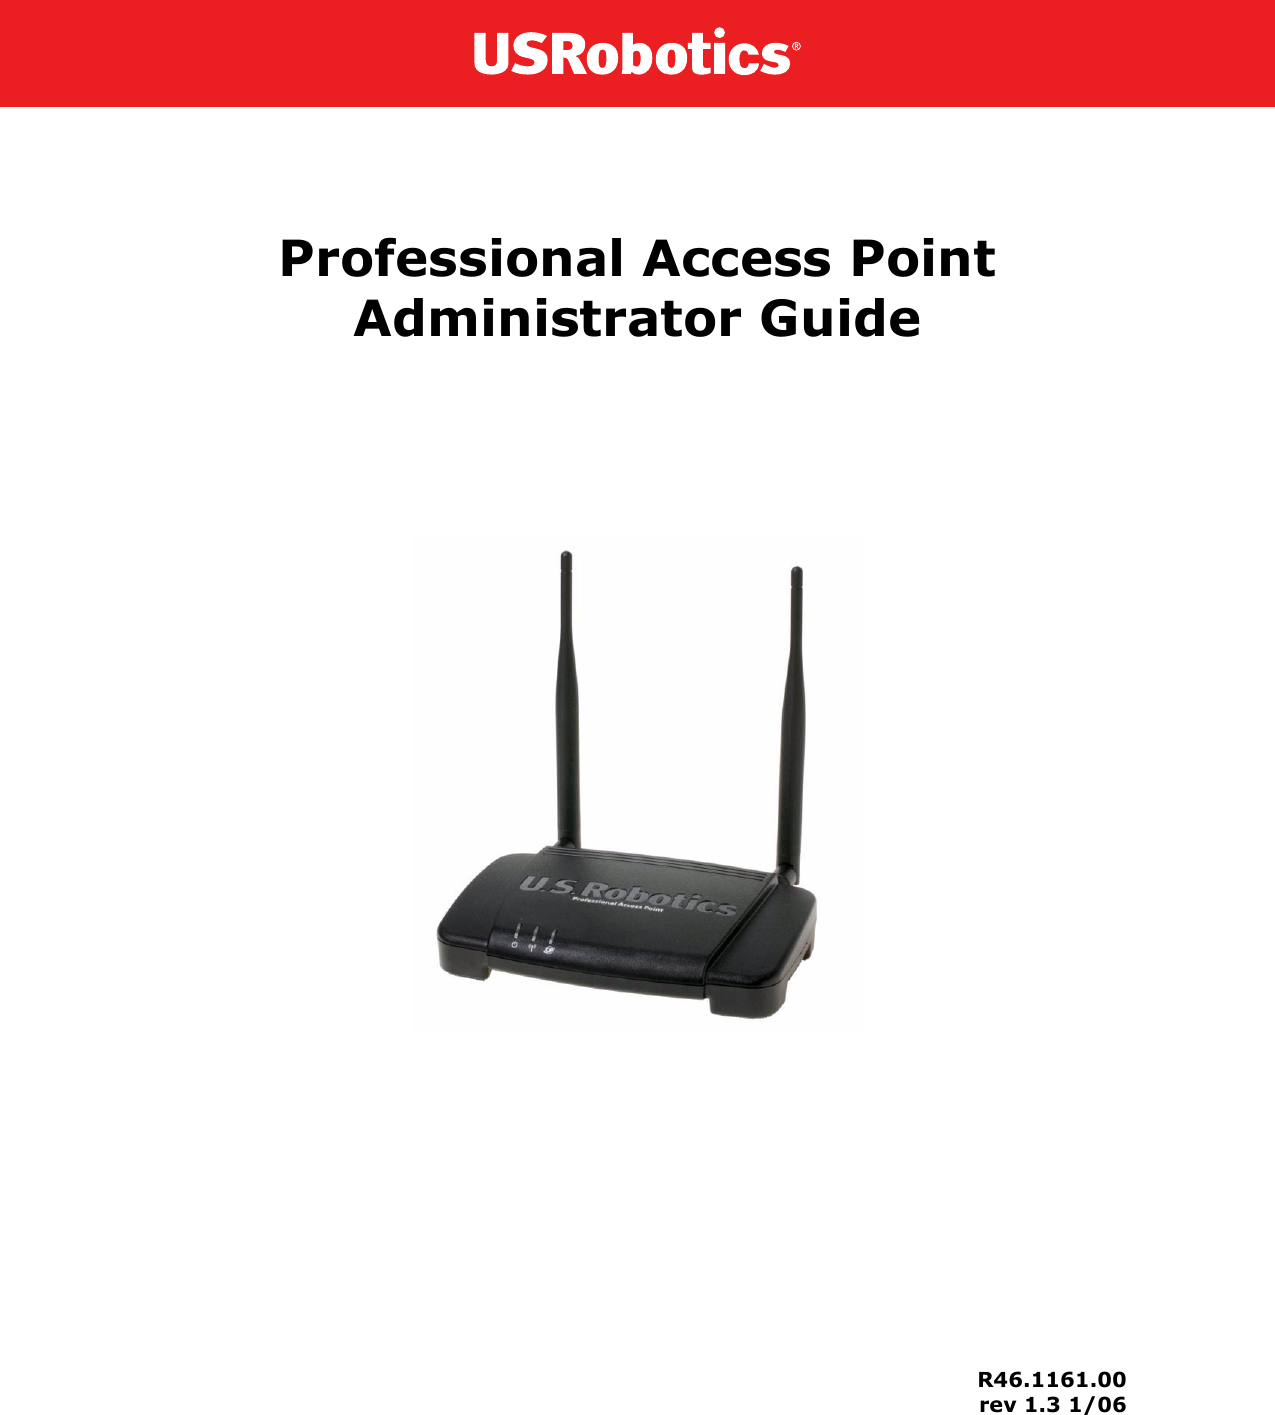 Professional Access PointAdministrator GuideR46.1161.00 rev 1.3 1/06